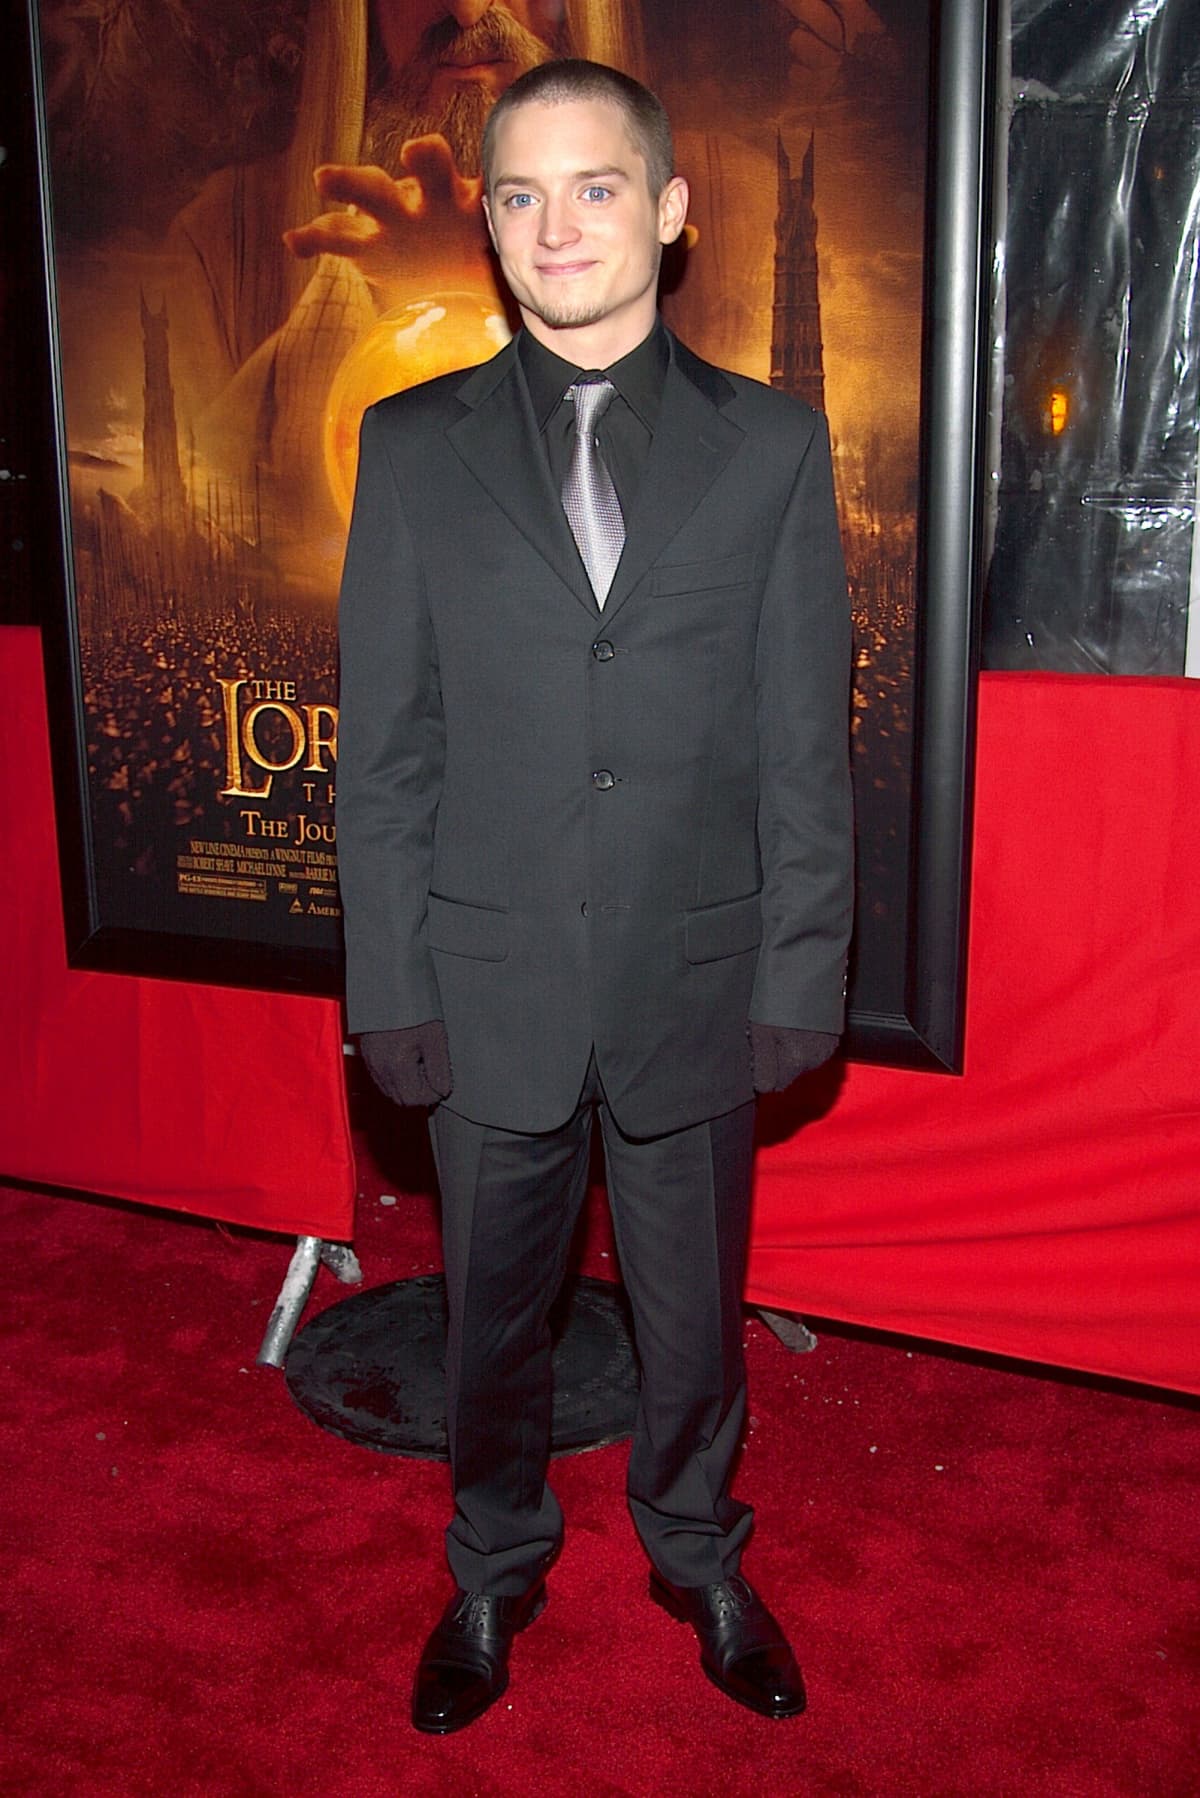 Elijah Wood during The Lord of The Rings: The Two Towers Premiere - New York at Ziegfeld Theatre in New York City, New York, United States. (Photo by Jim Spellman/WireImage)